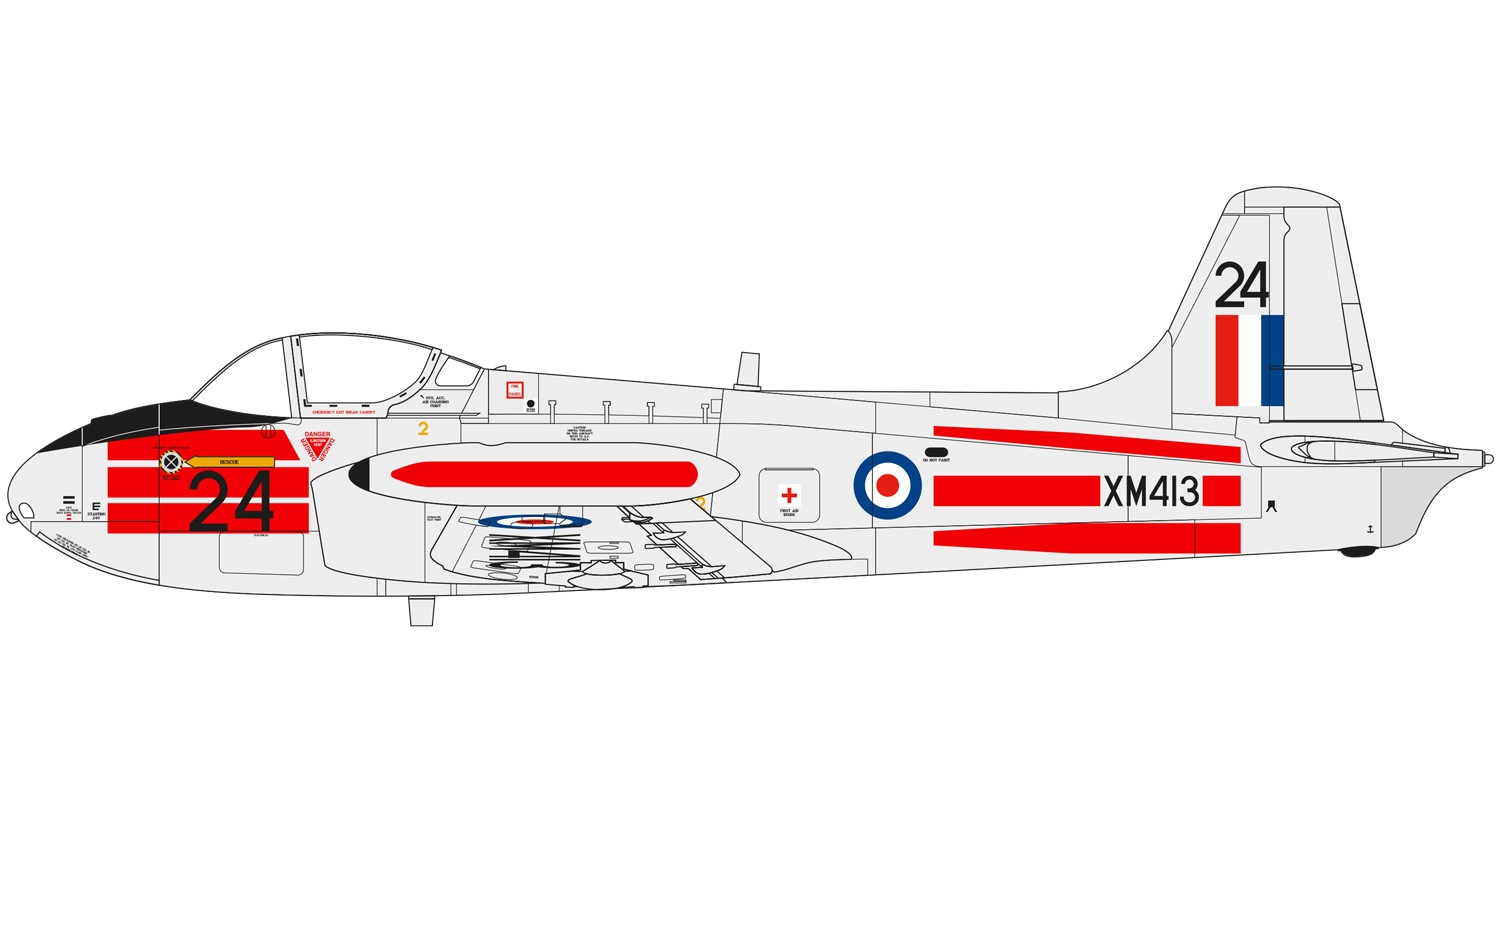 Hunting Percival Jet Provost T.3, No.2 Flying Training School, Royal Air Force Gaydon, Warwickshire, Anglie, 1967.